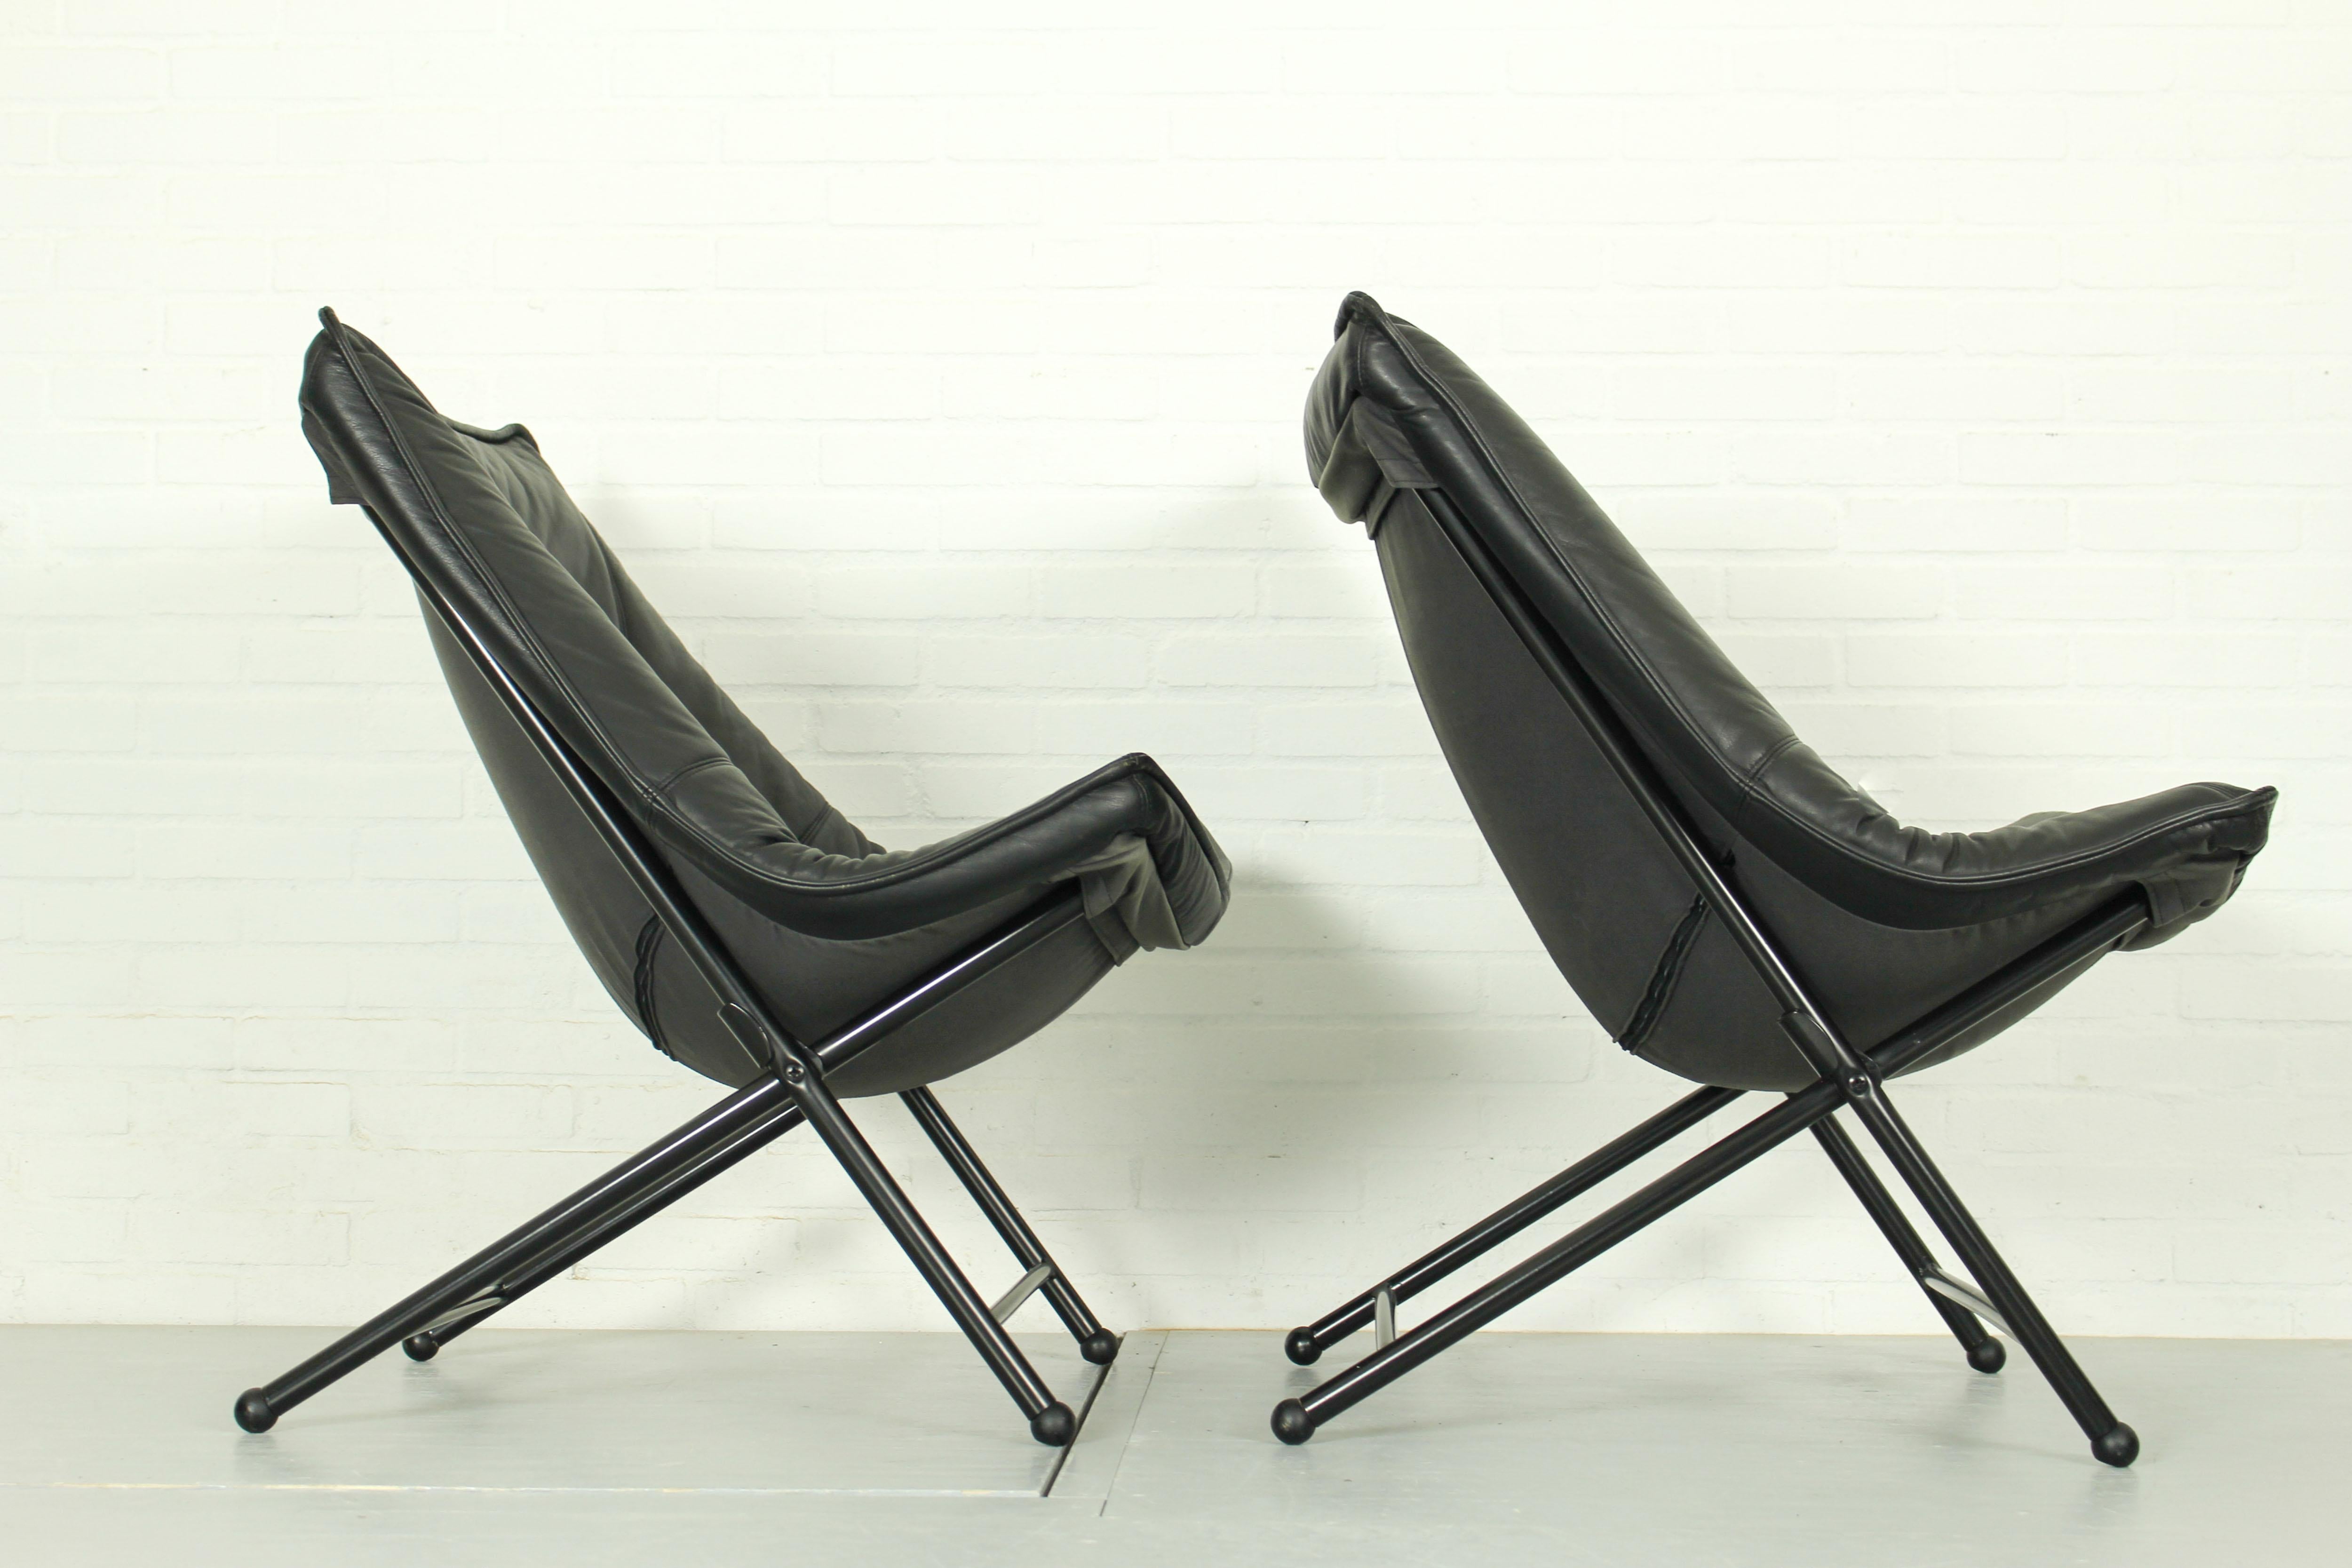 Set of 2 midcentury Easy Chairs produced by Teun van Zanten for Molinari in the 1970s. The chairs feature a stable tubular black frame with very comfortable black leather upholstery with organic shape. The chairs are foldable. They remain in a